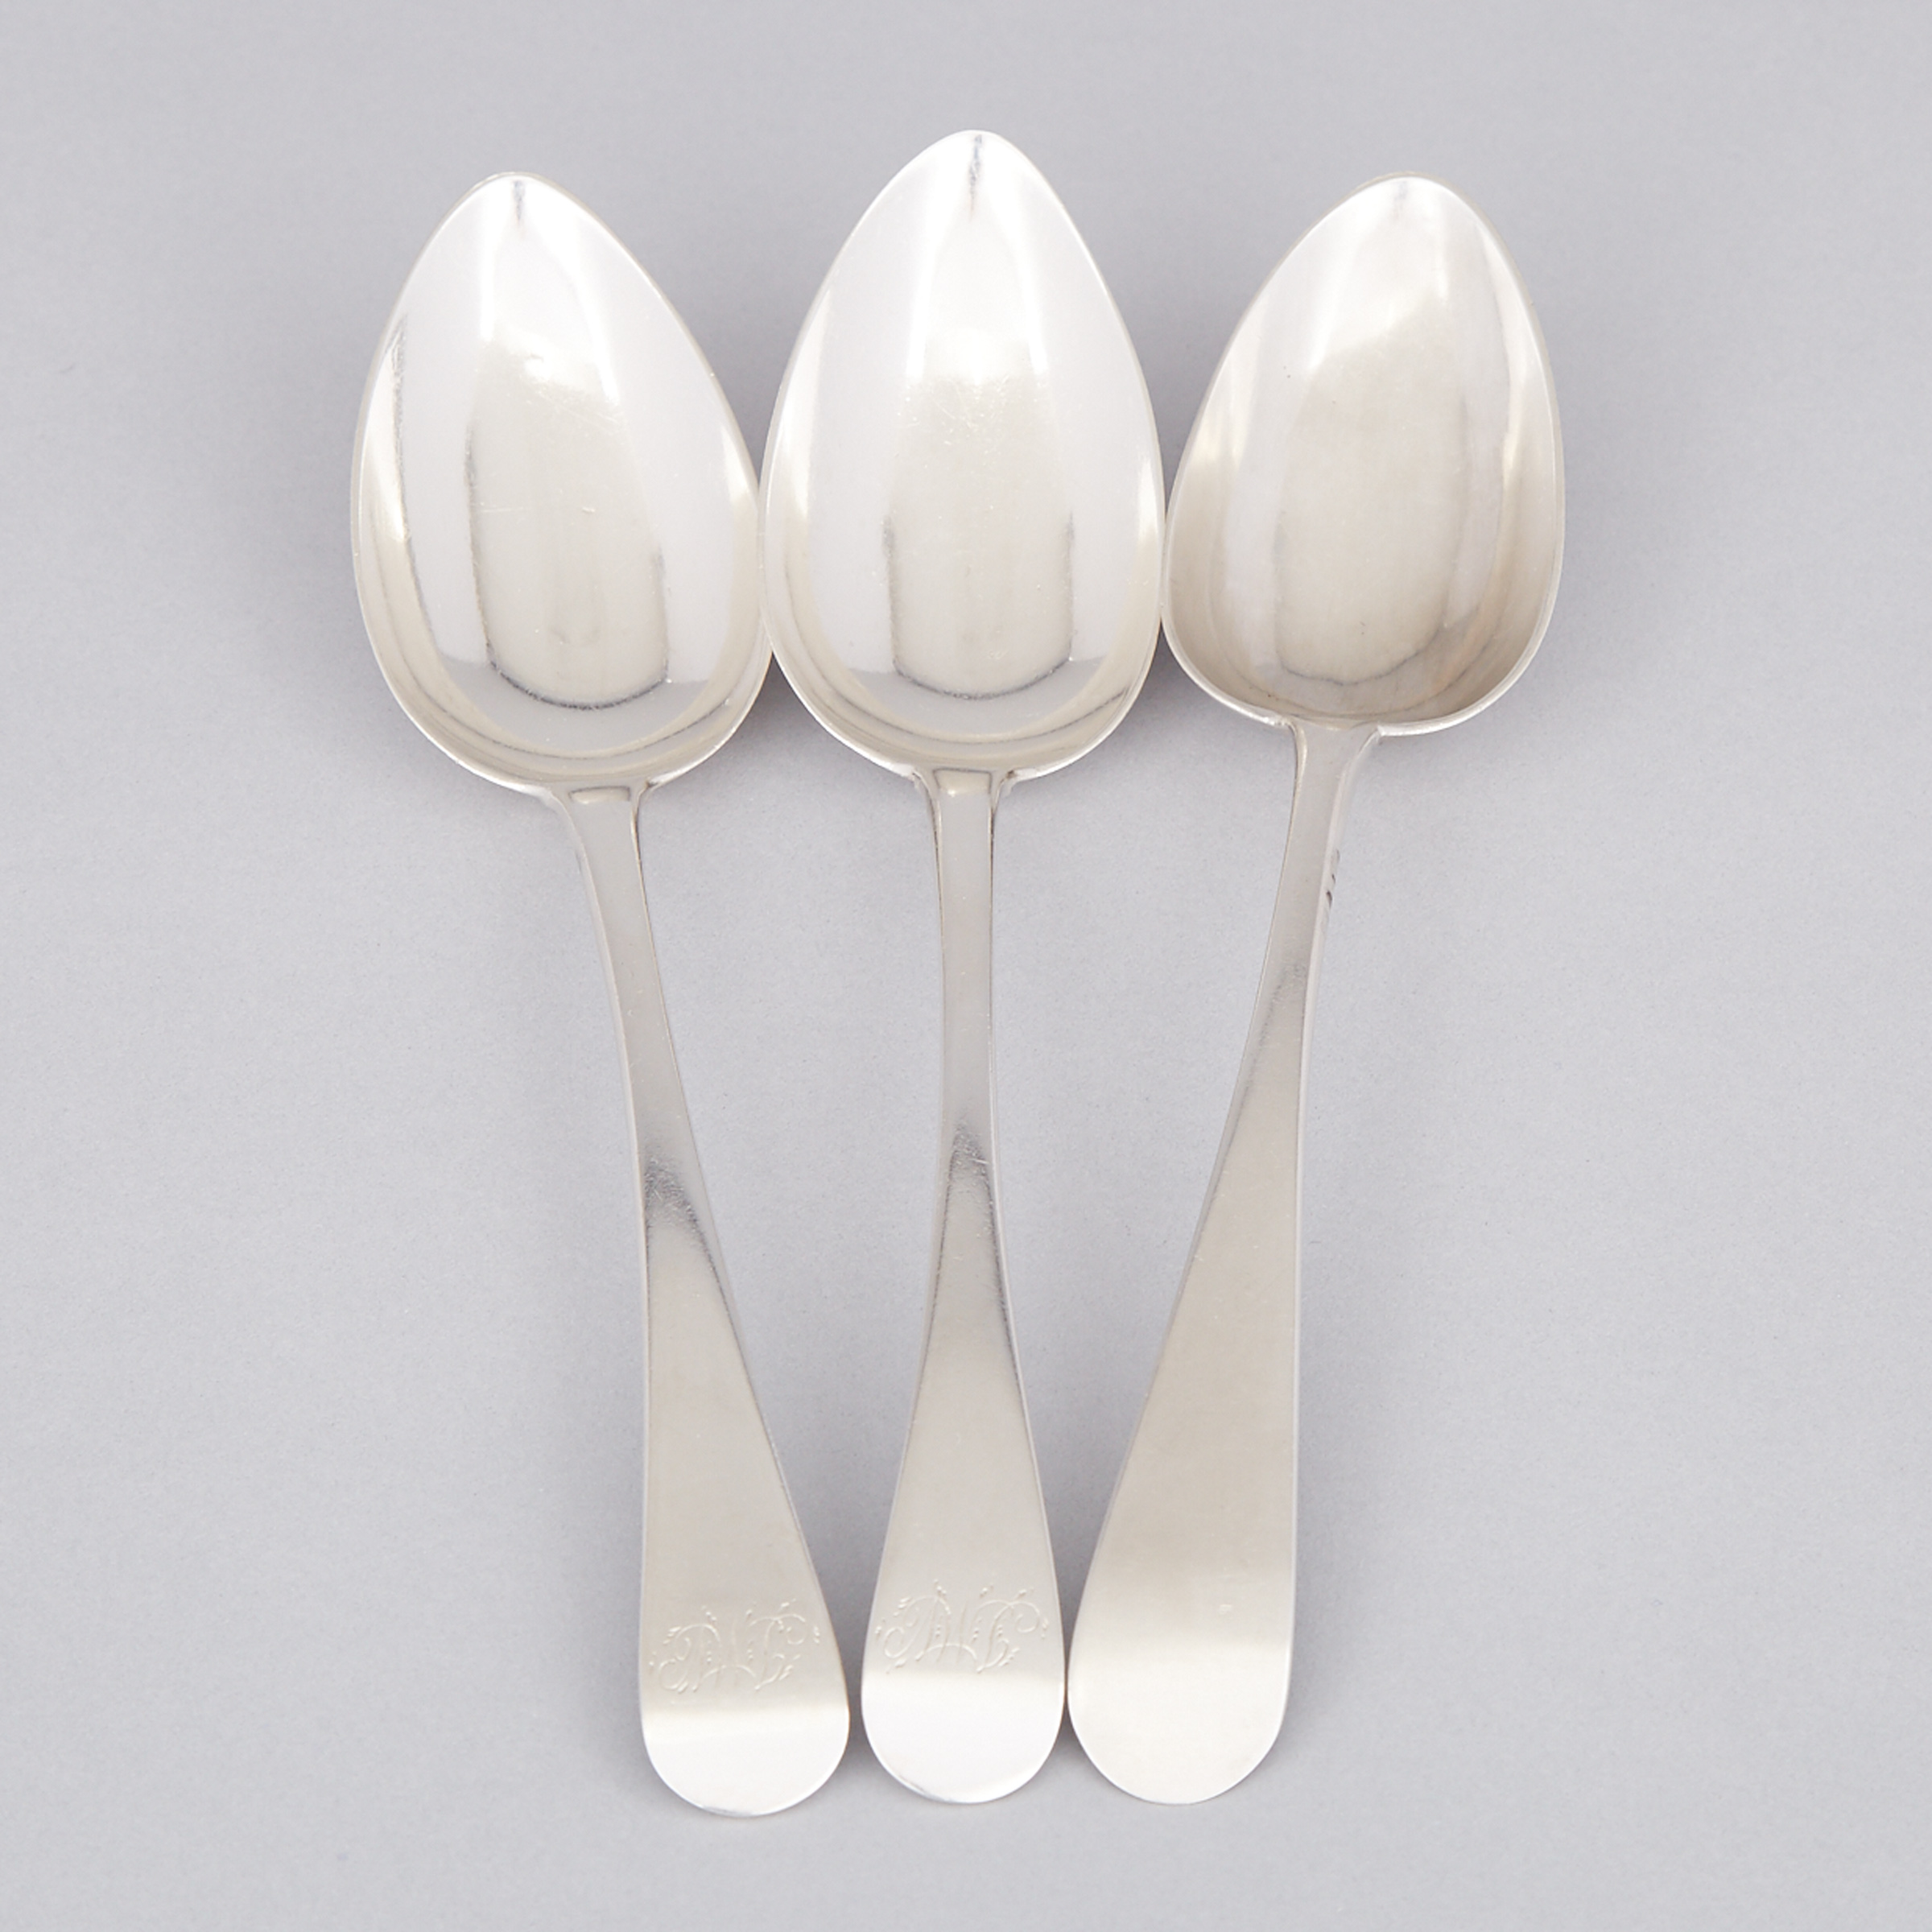 Three Canadian Silver Old English Pattern Table Spoons, Laurent Amiot, Quebec City, Que., c.1800